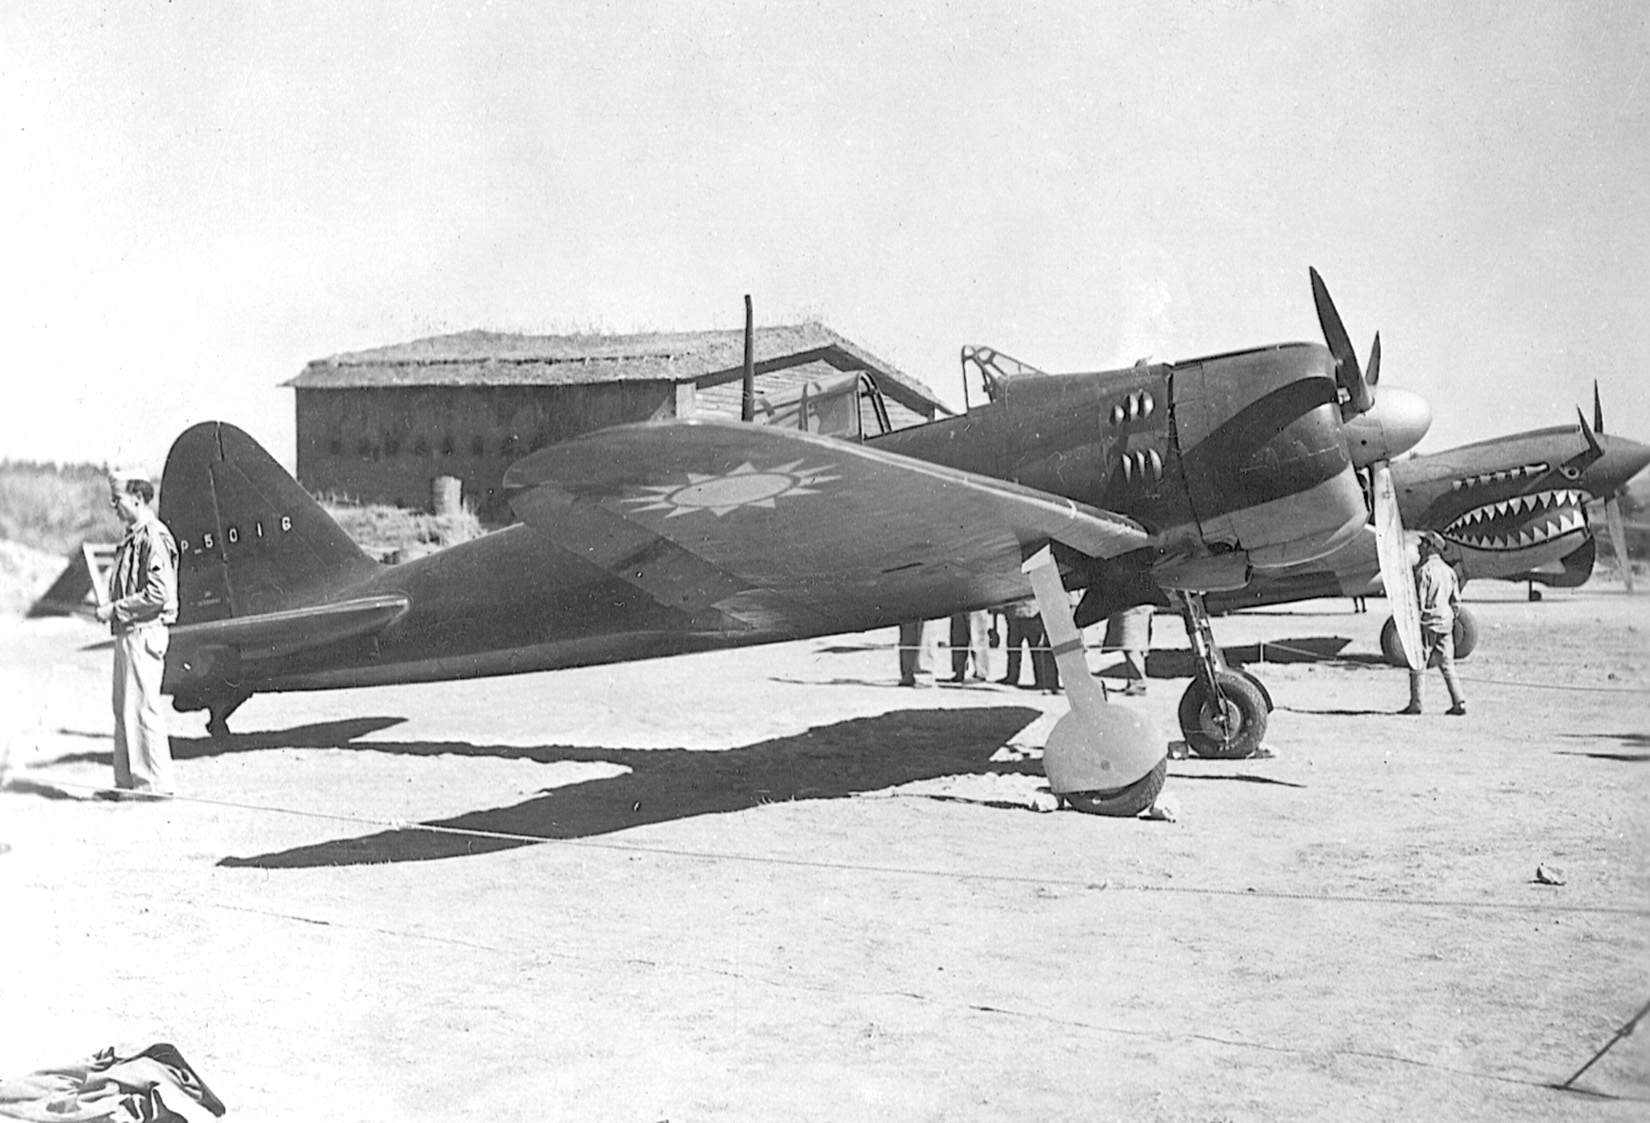 A Zero fighter captured by the Allies and bearing Chinese markings sits beside P-40 Tomahawk fighters of General Claire Chennault’s Flying Tigers.